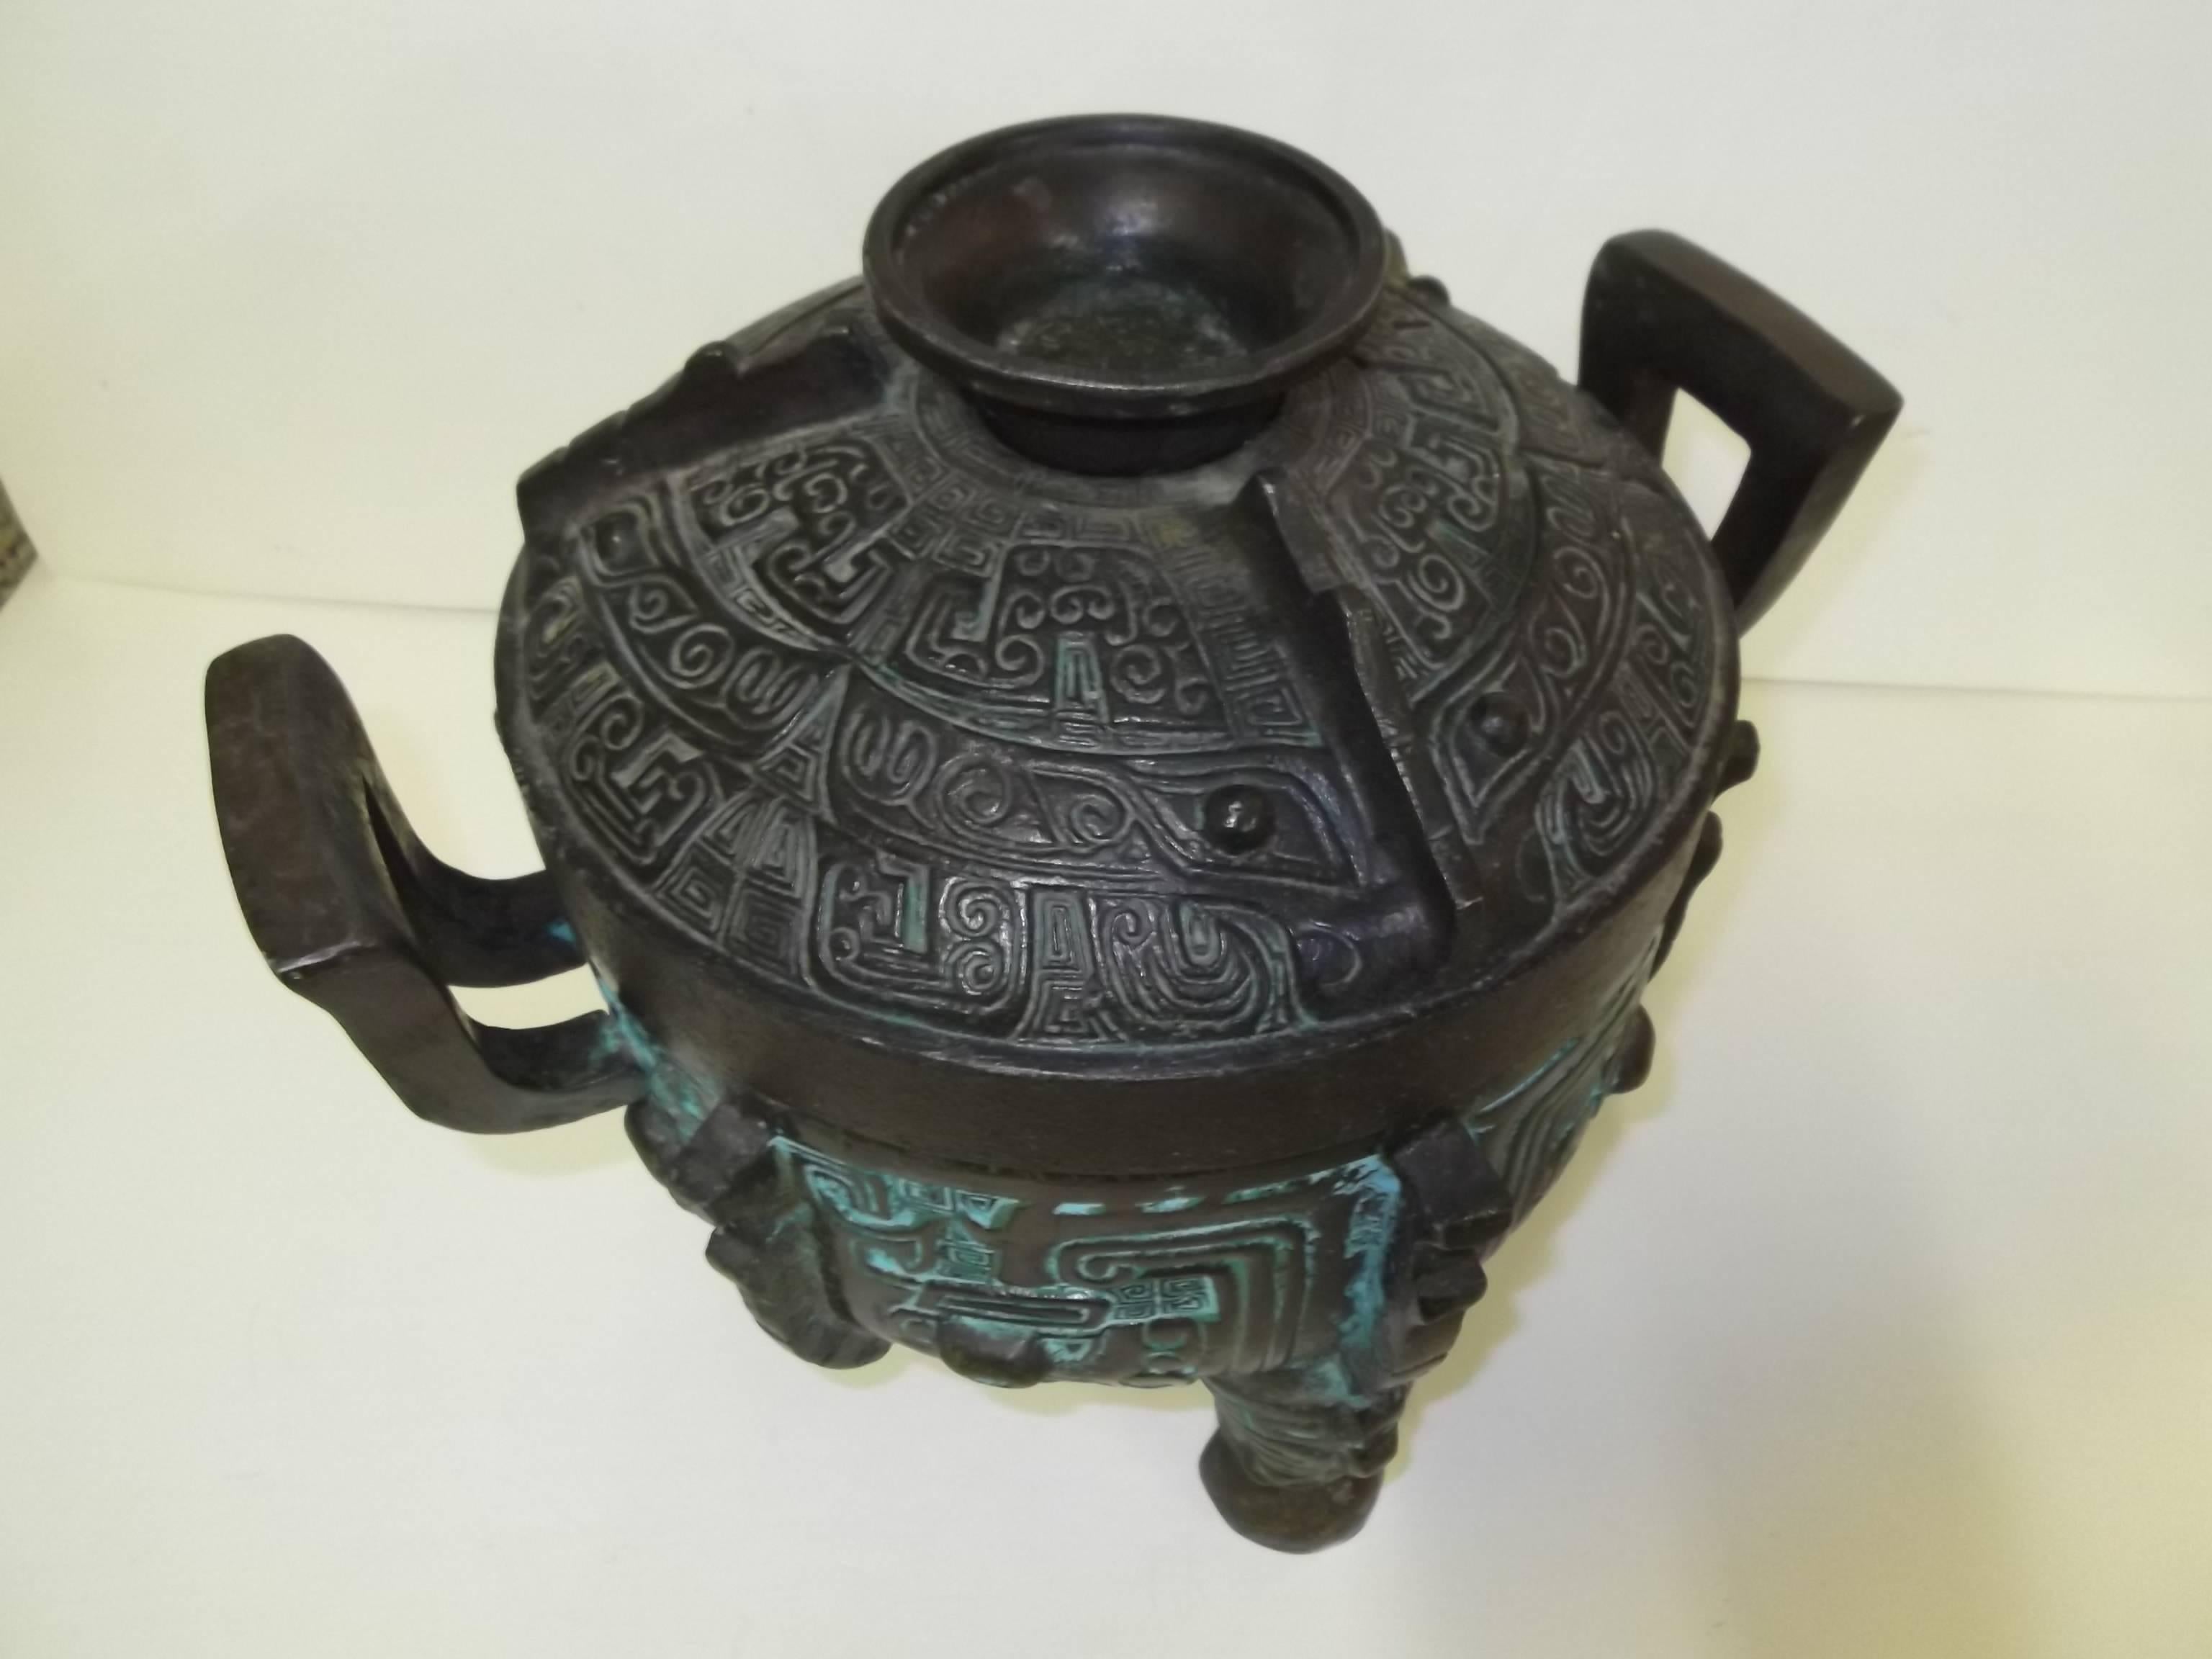 This is a great bar accessory! It is a heavy cast metal ice bucket in the form of an urn or censor, It has deep relief decorating in an Asian design with faces incorporated. It is a dark metal with some green patina accents, less on the lid. It is